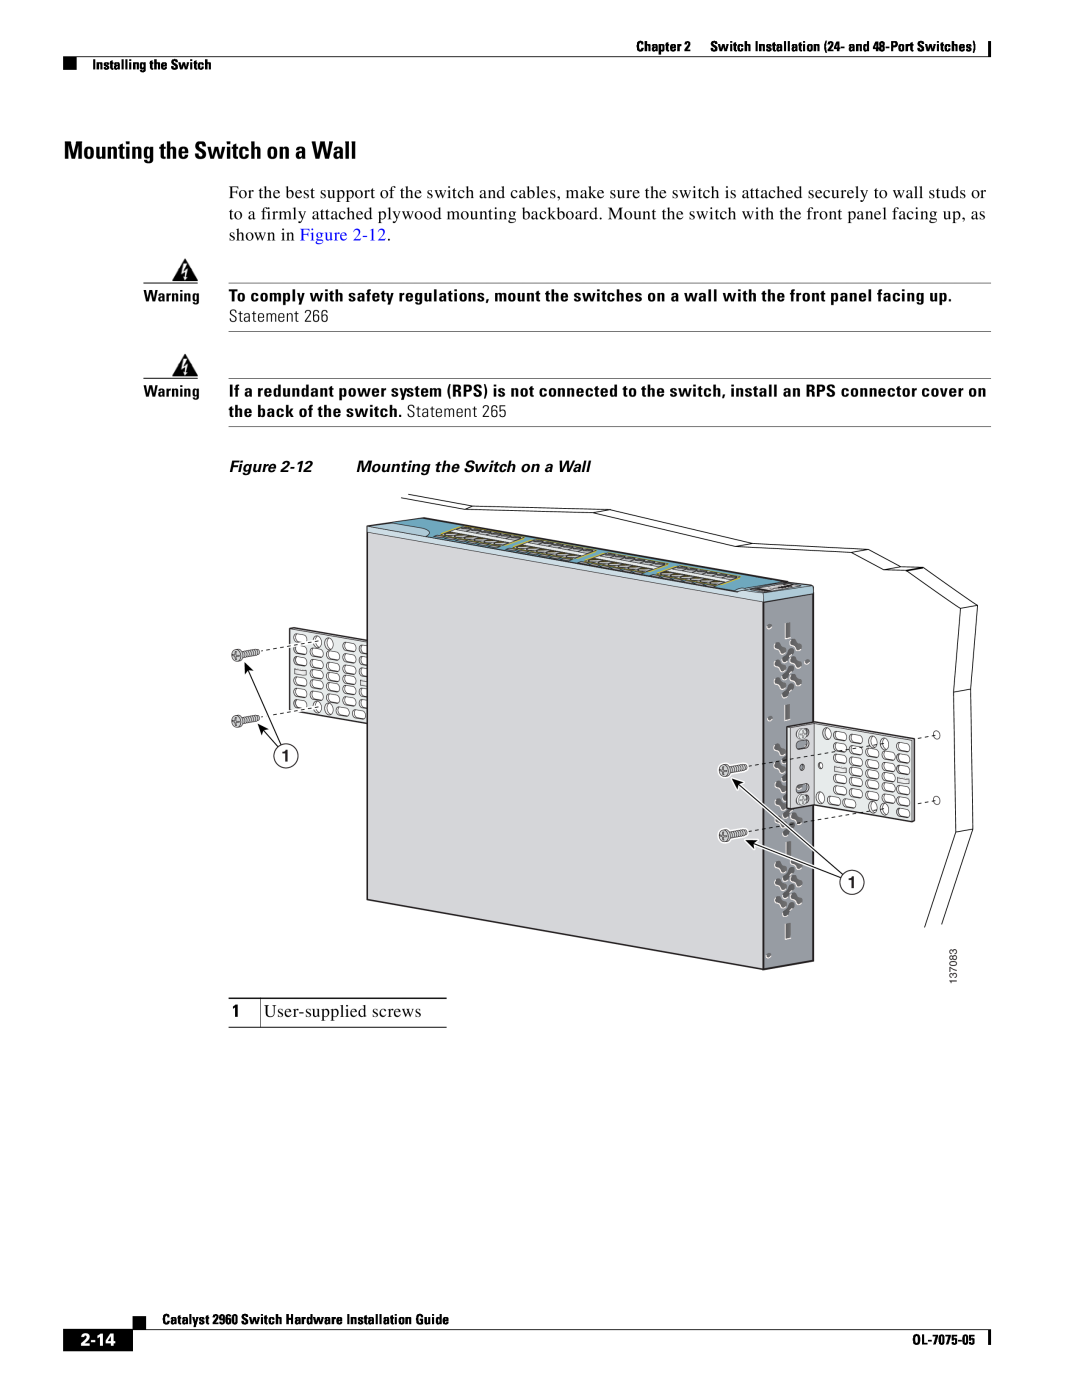 Cisco Systems 2960 specifications Mounting the Switch on a Wall, 2-14 